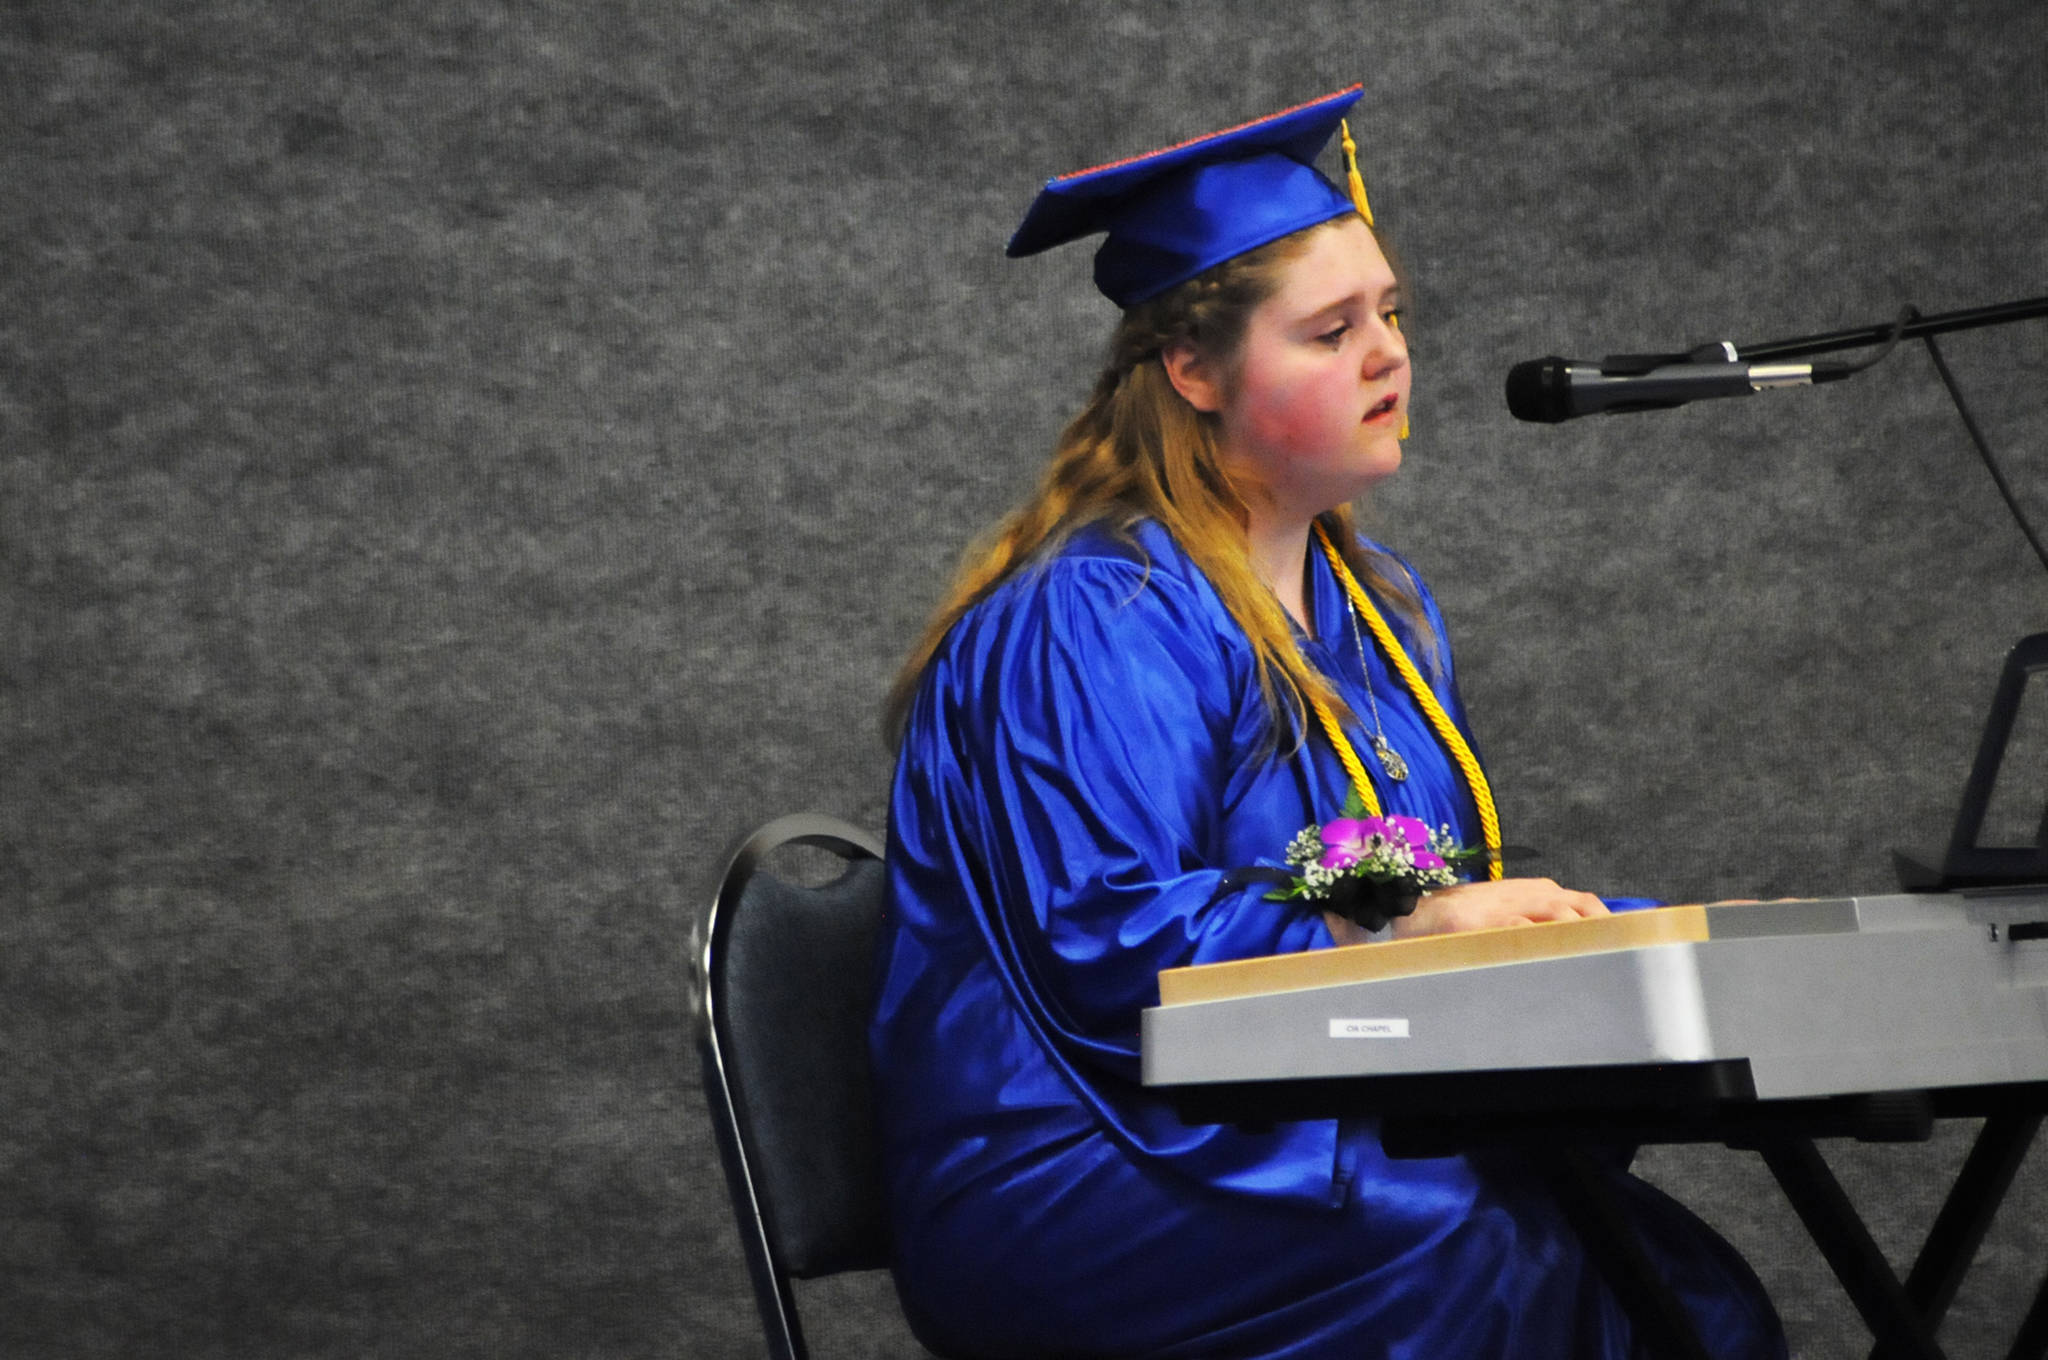 Brooke Kent, a Cook Inlet Academy graduate, plays and sings the song “Soar” by Meredith Andrews at the school’s graduation ceremony Sunday, May 7, 2017 in Soldotna, Alaska. (Elizabeth Earl/Peninsula Clarion)  Brooke Kent, a Cook Inlet Academy graduate, plays and sings the song “Soar” by Meredith Andrews at the school’s graduation ceremony Sunday in Soldotna. (Elizabeth Earl/Peninsula Clarion)